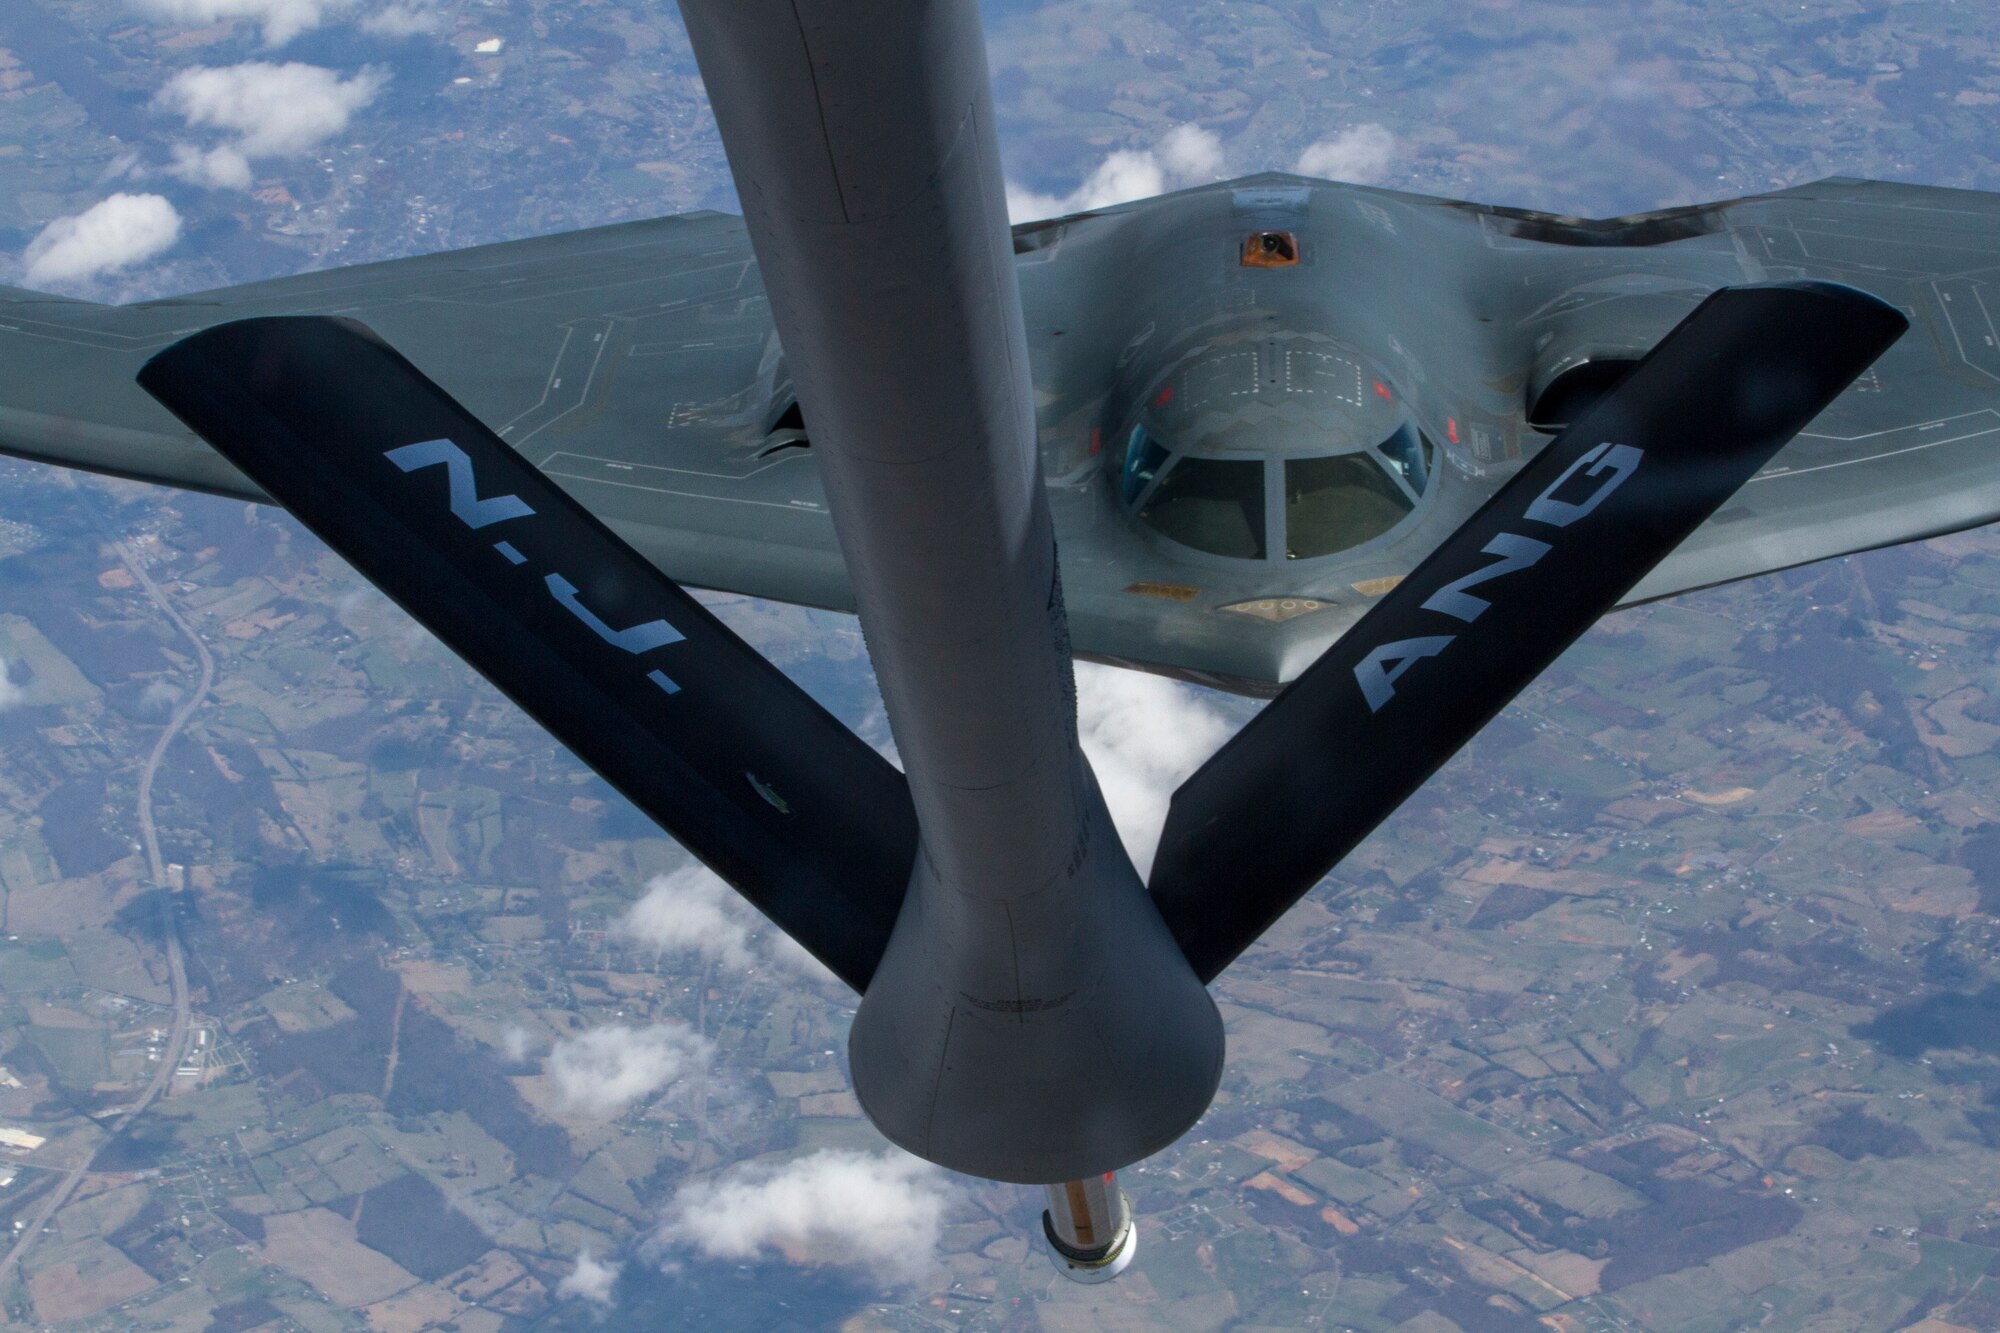 A 108th Wing KC-135 Stratotanker with the New Jersey Air National Guard, assigned to Joint Base McGuire Dix-Lakehurst, N.J., refuels a B-2 Spirit bomber April 2, 2014. The air refueling mission provided 25 Air Force ROTC cadets from Detachment 750, St. Joseph's University, Philadelphia, Pa., the opportunity to observe the mission as part of the 108th Wing's orientation flight program. The orientation flight offers the cadets an opportunity to observe the pilots and aircrew perform their jobs in a real world environment. The B-2 Spirit, which is part of Air Force Global Strike Command is a multi-role bomber capable of delivering both conventional and nuclear munitions, is stationed at Whiteman Air Force Base, Mo. (U.S. Air National Guard photo by Master Sgt. Mark C. Olsen/Released)